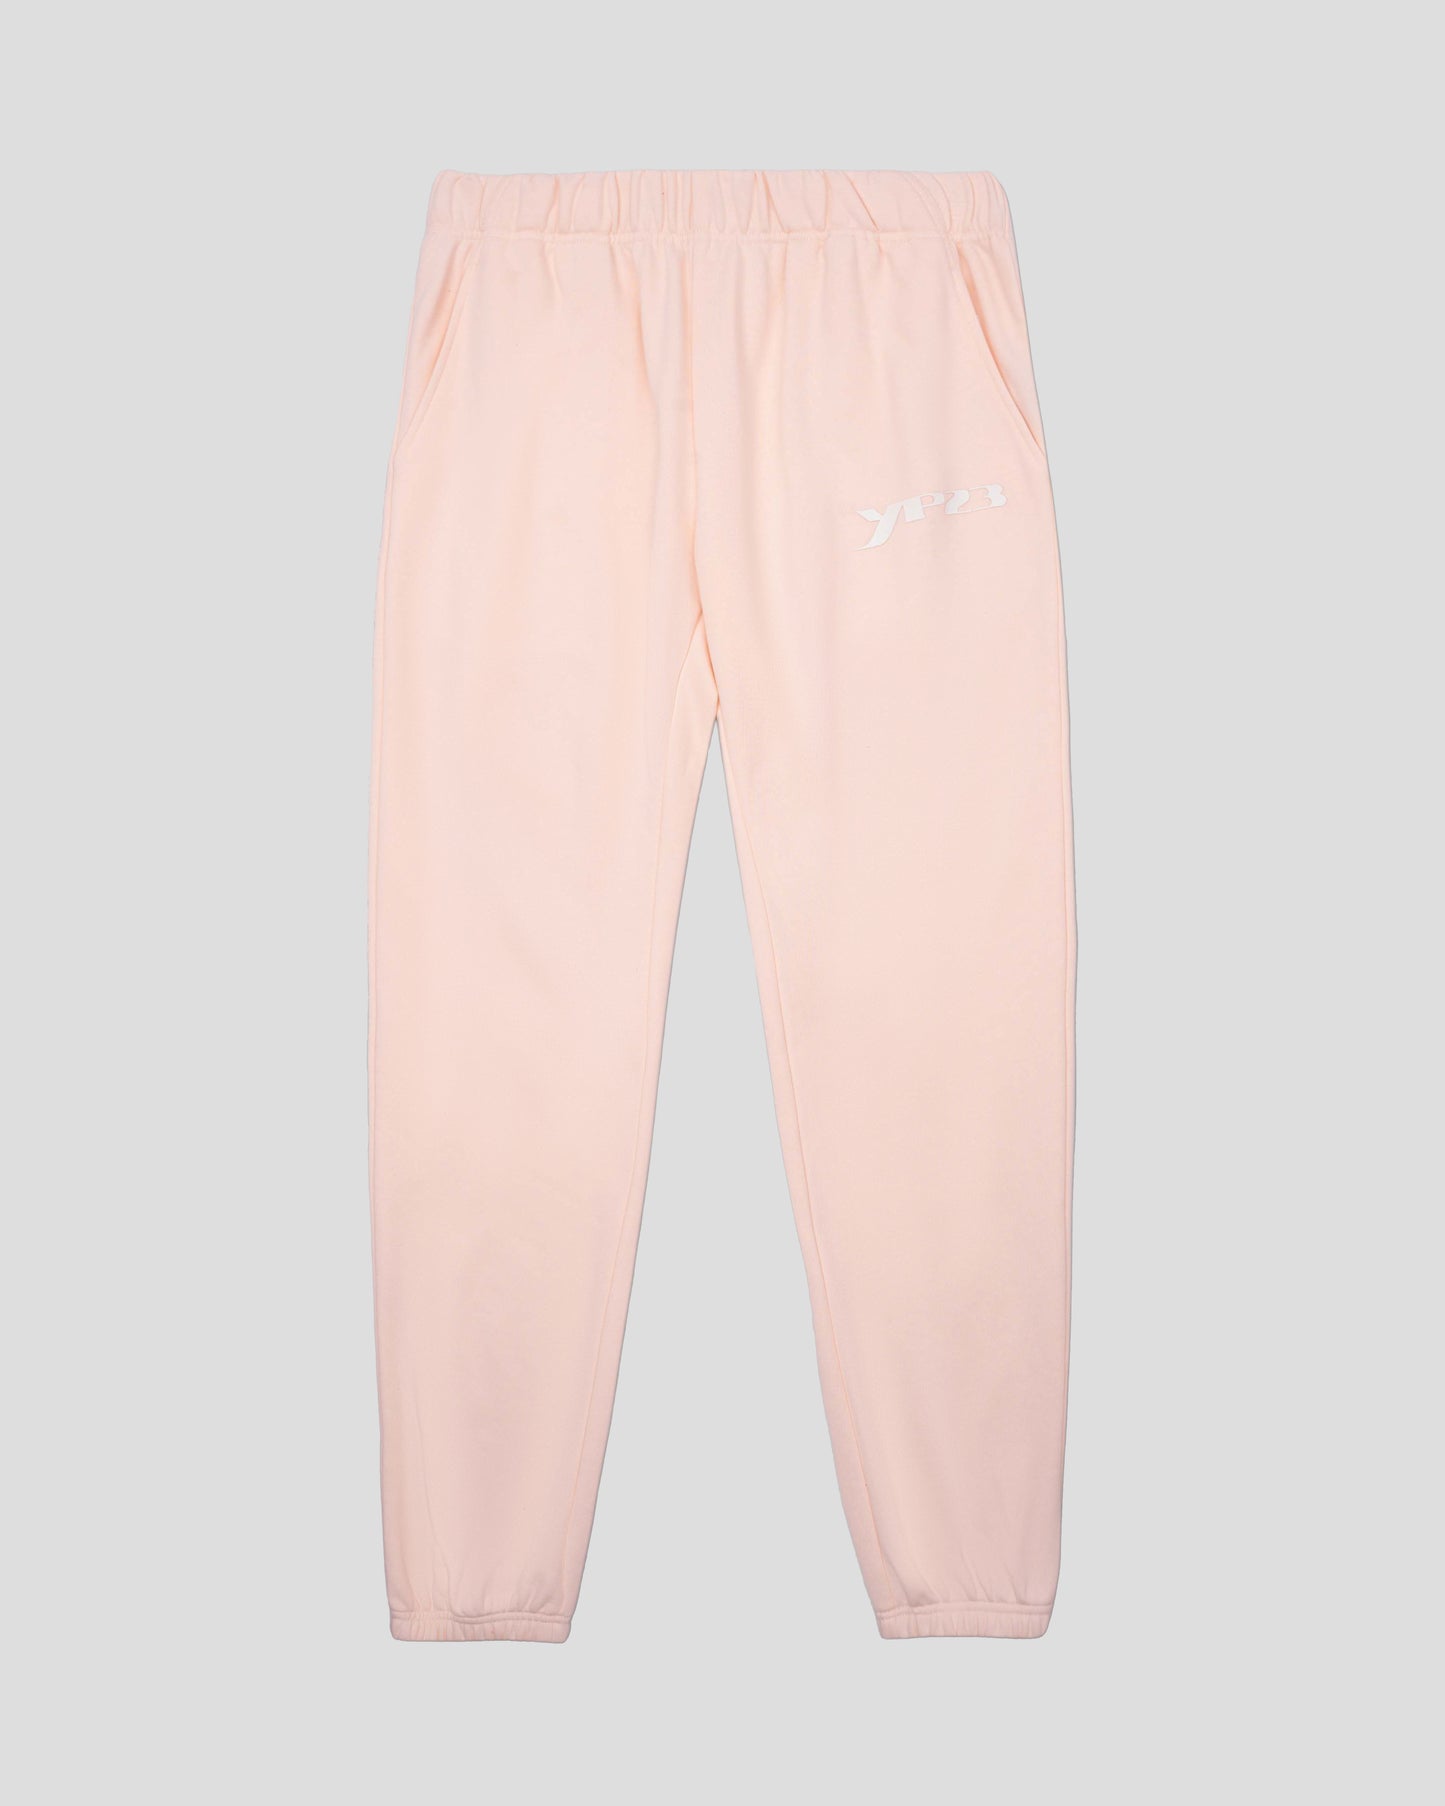 YOUTHPRIVILEGE ESSENTIAL SWEATPANTS - LIGHT PINK COLOR